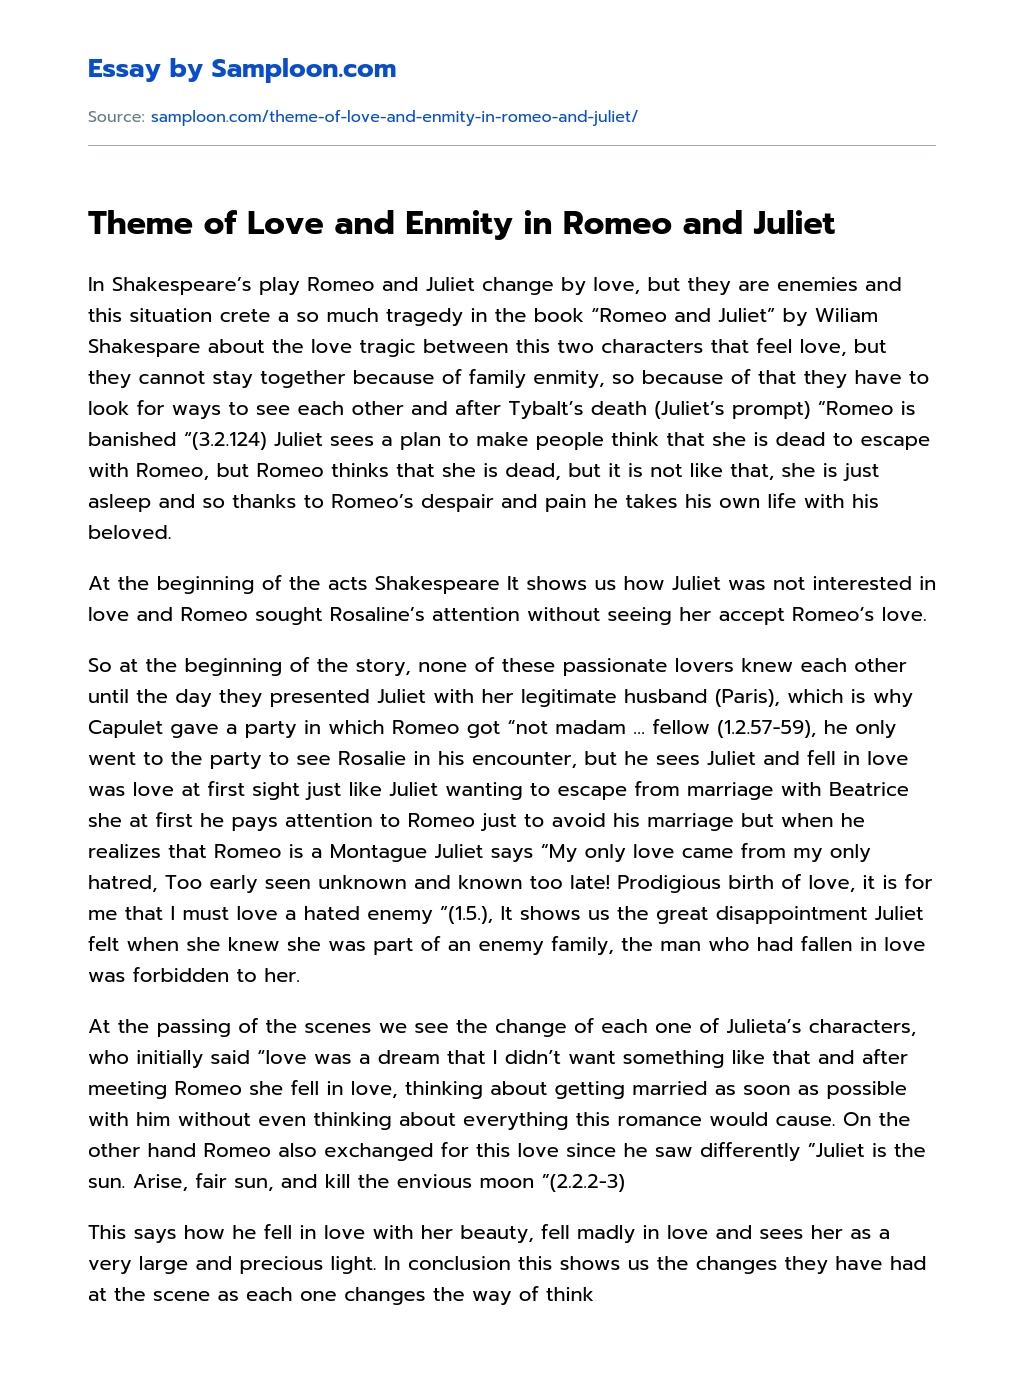 Theme of Love and Enmity in Romeo and Juliet Summary essay